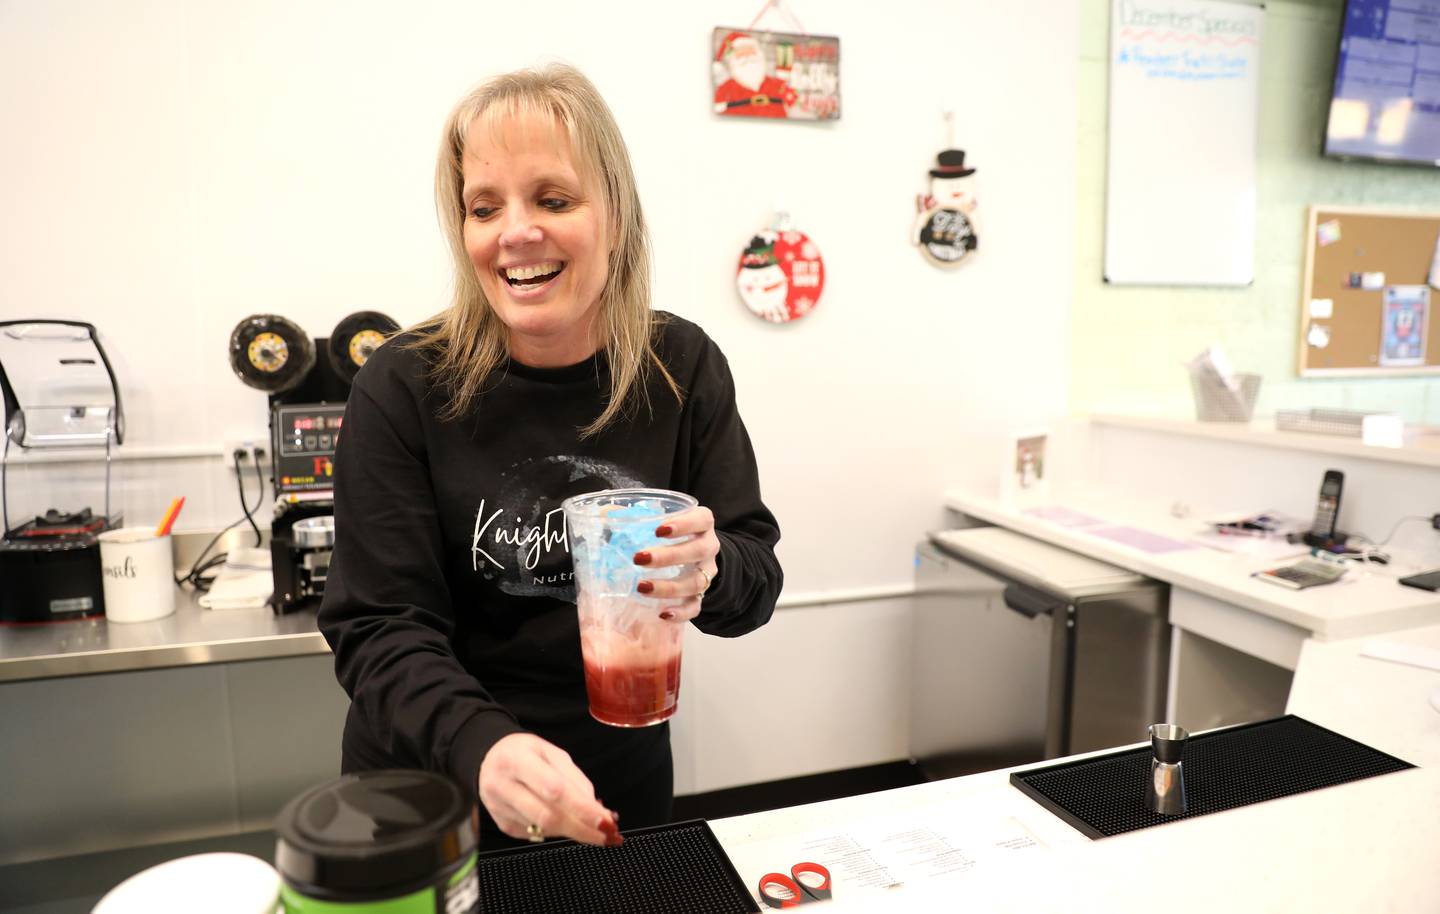 Lori Palmisano making Captain America Mega Tea. Palmisano and his daughter Jessica Heinrich opened the nightclub Nutrition on North Street in downtown Elburn.